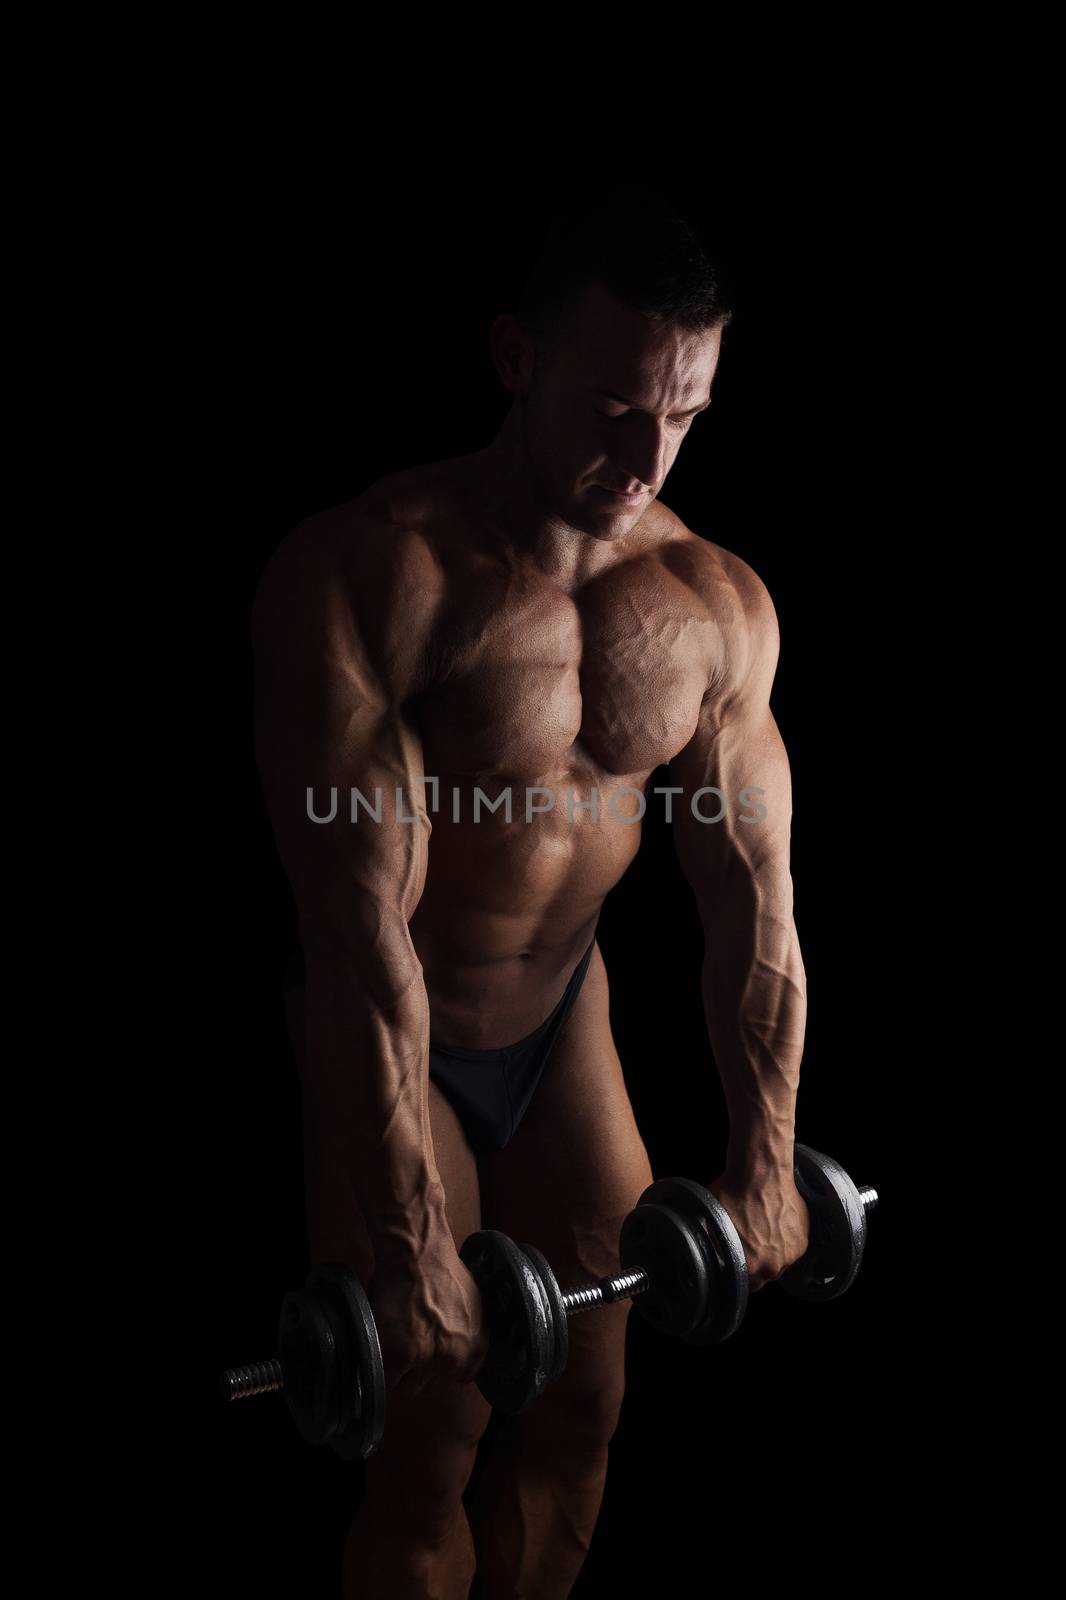 Sexy shirtless bodybuilder holding dumbbell isolated on black background. Extreme strength, muscles and fitness.